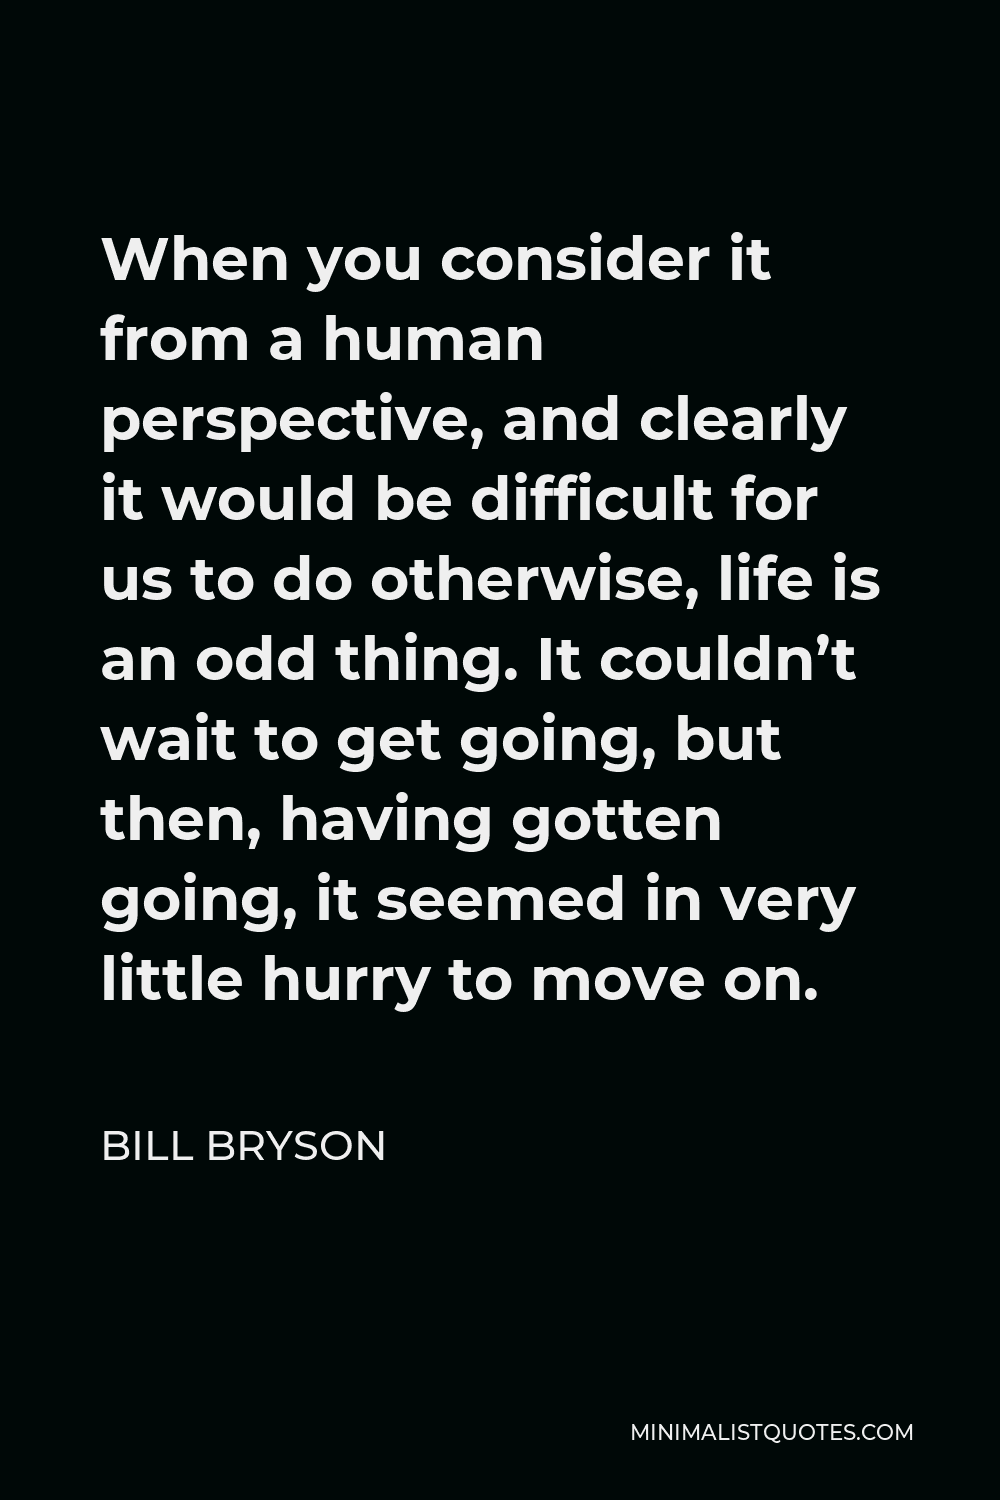 Bill Bryson Quote - When you consider it from a human perspective, and clearly it would be difficult for us to do otherwise, life is an odd thing. It couldn’t wait to get going, but then, having gotten going, it seemed in very little hurry to move on.